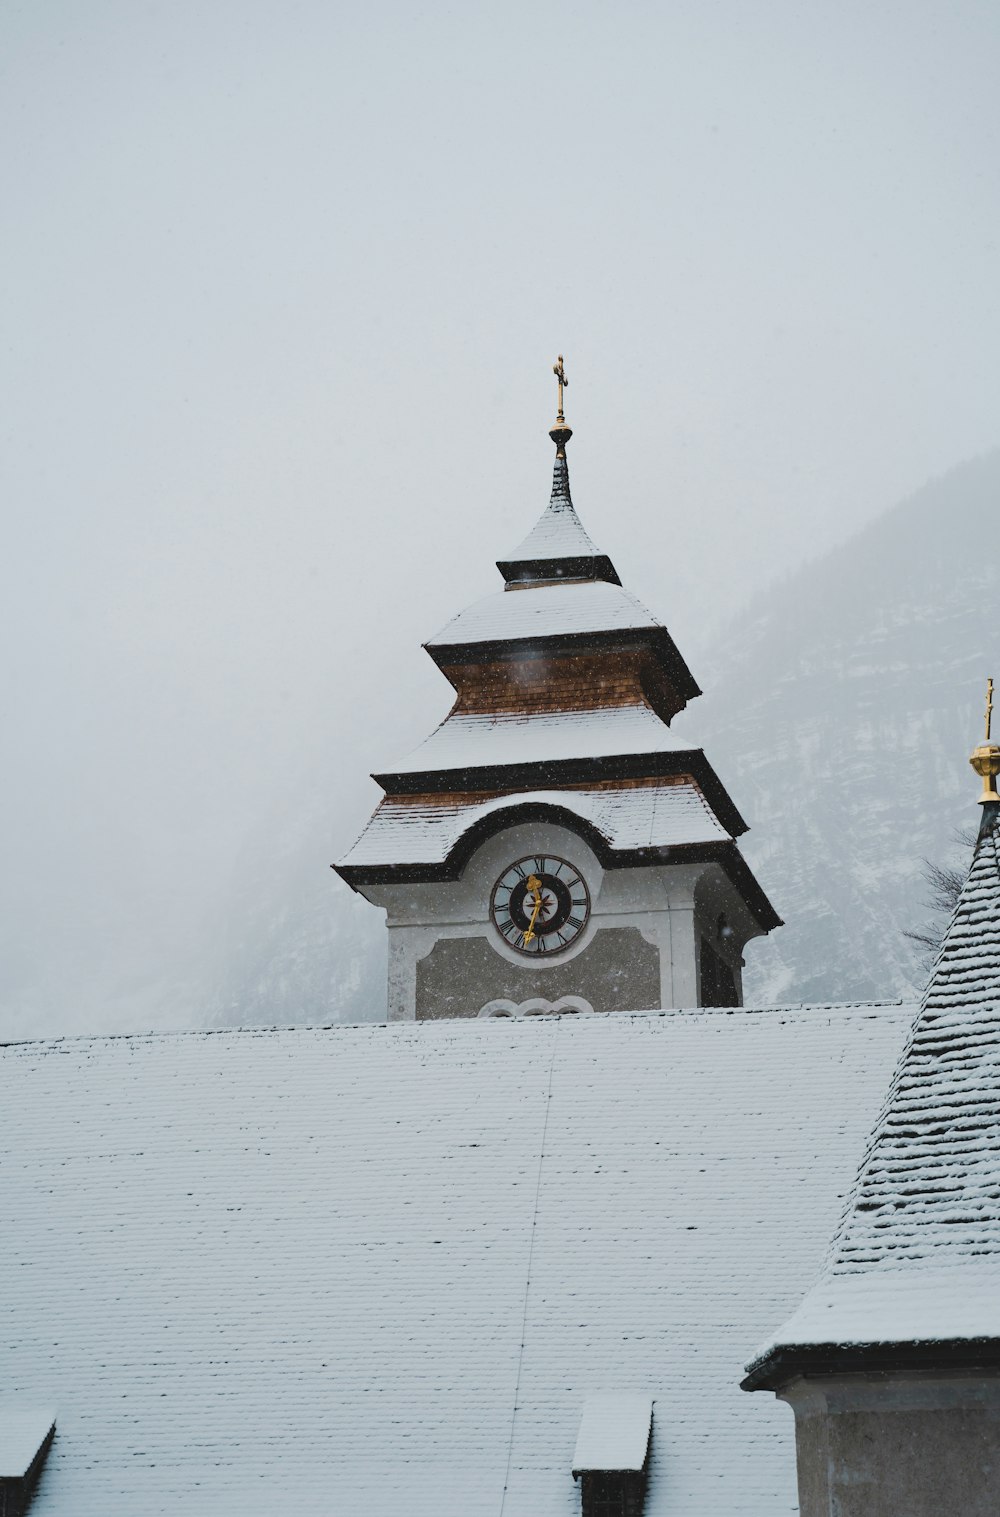 a clock tower on top of a building covered in snow